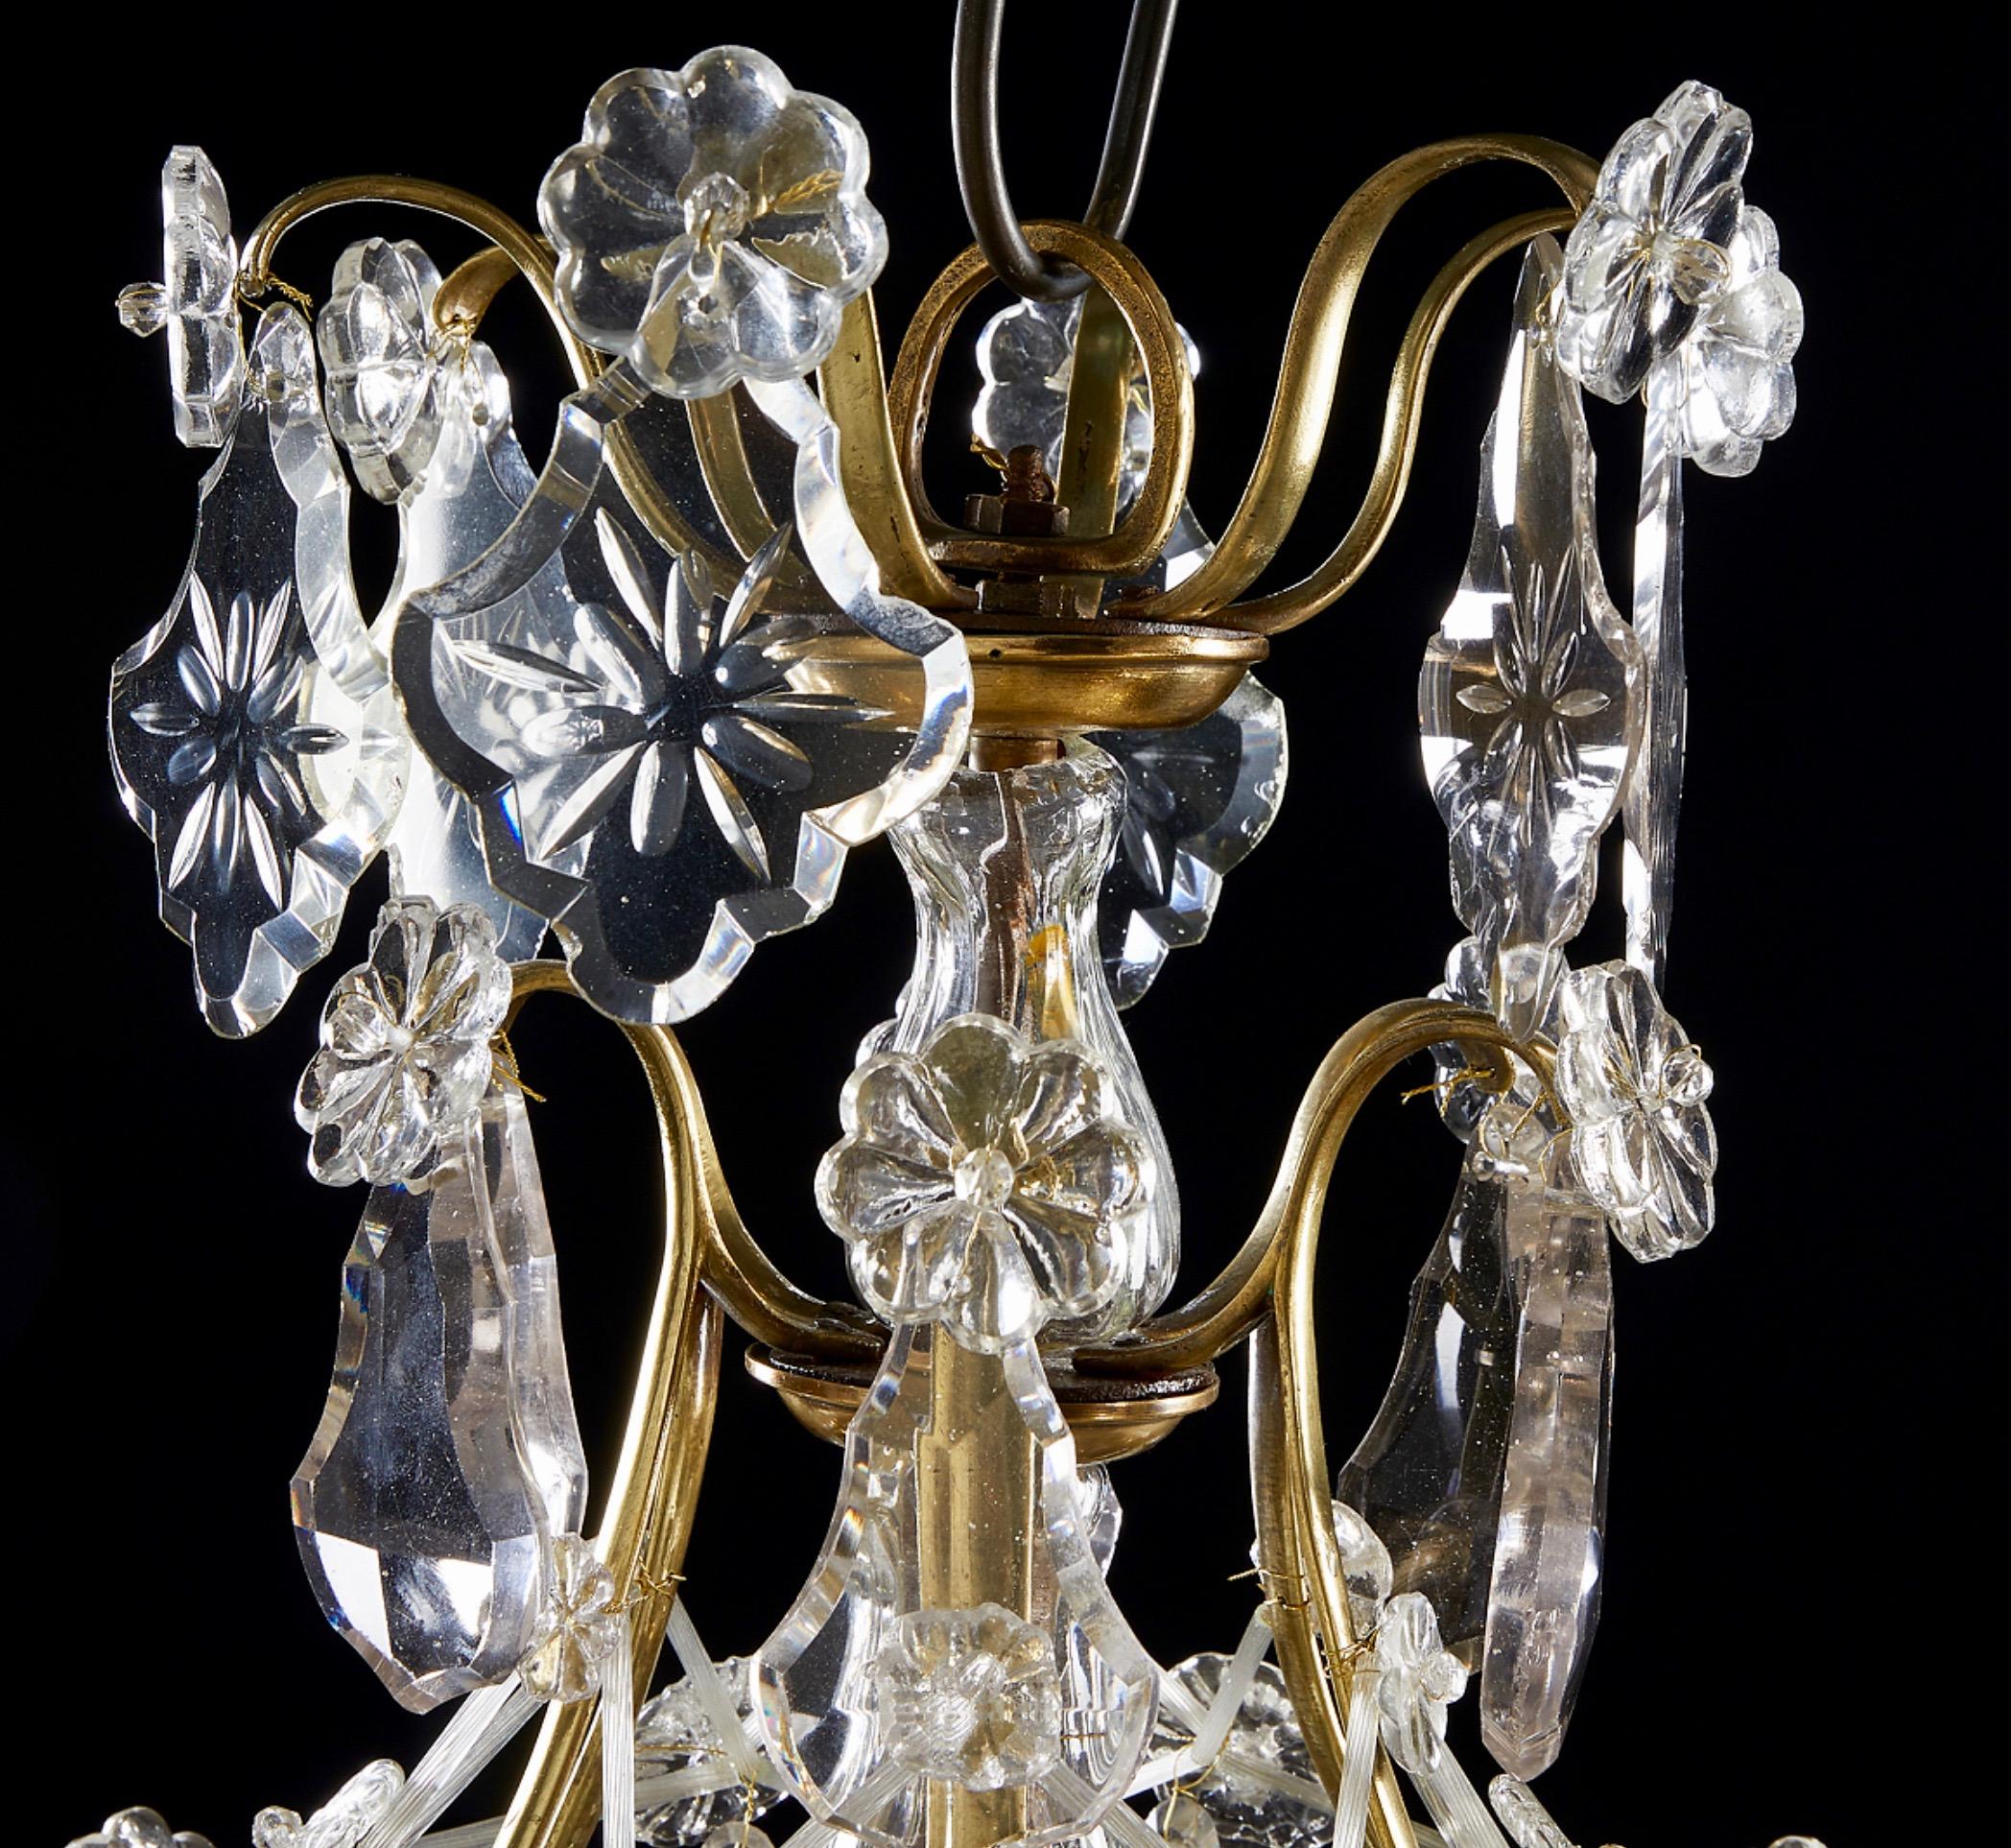 A Swedish Rococo chandelier made in the second half of the 18th century. Unusually small. The chandelier has a brass skeleton with crystals that are shaped like leafs, flowers and a lot more. All handcut and very good condition.